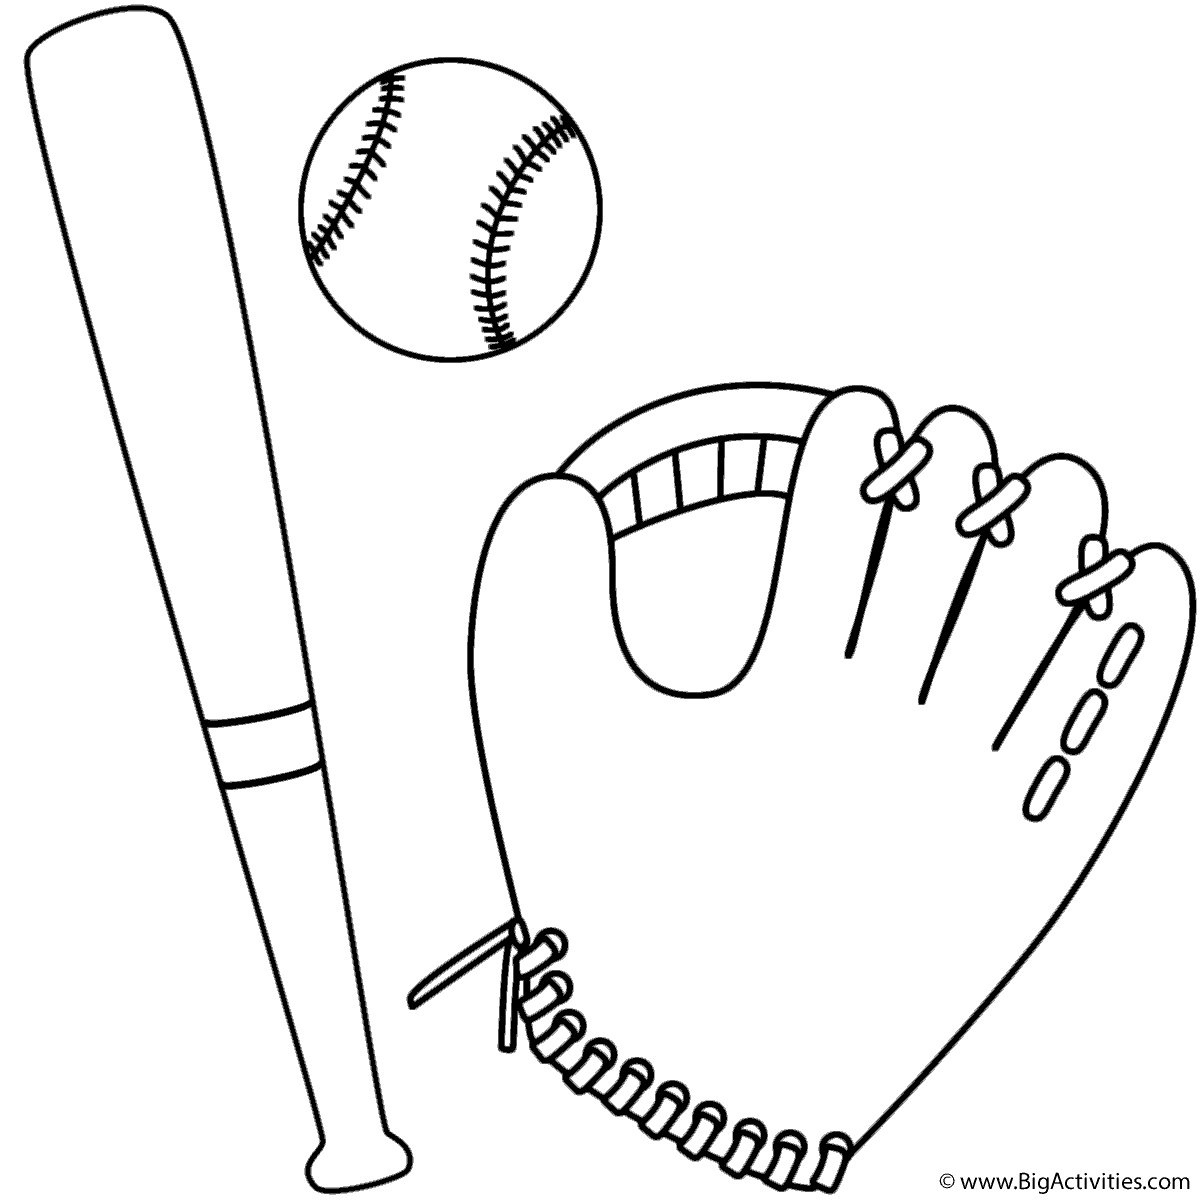 Baseball Glove, Ball and Bat - Coloring Page (Father's Day)